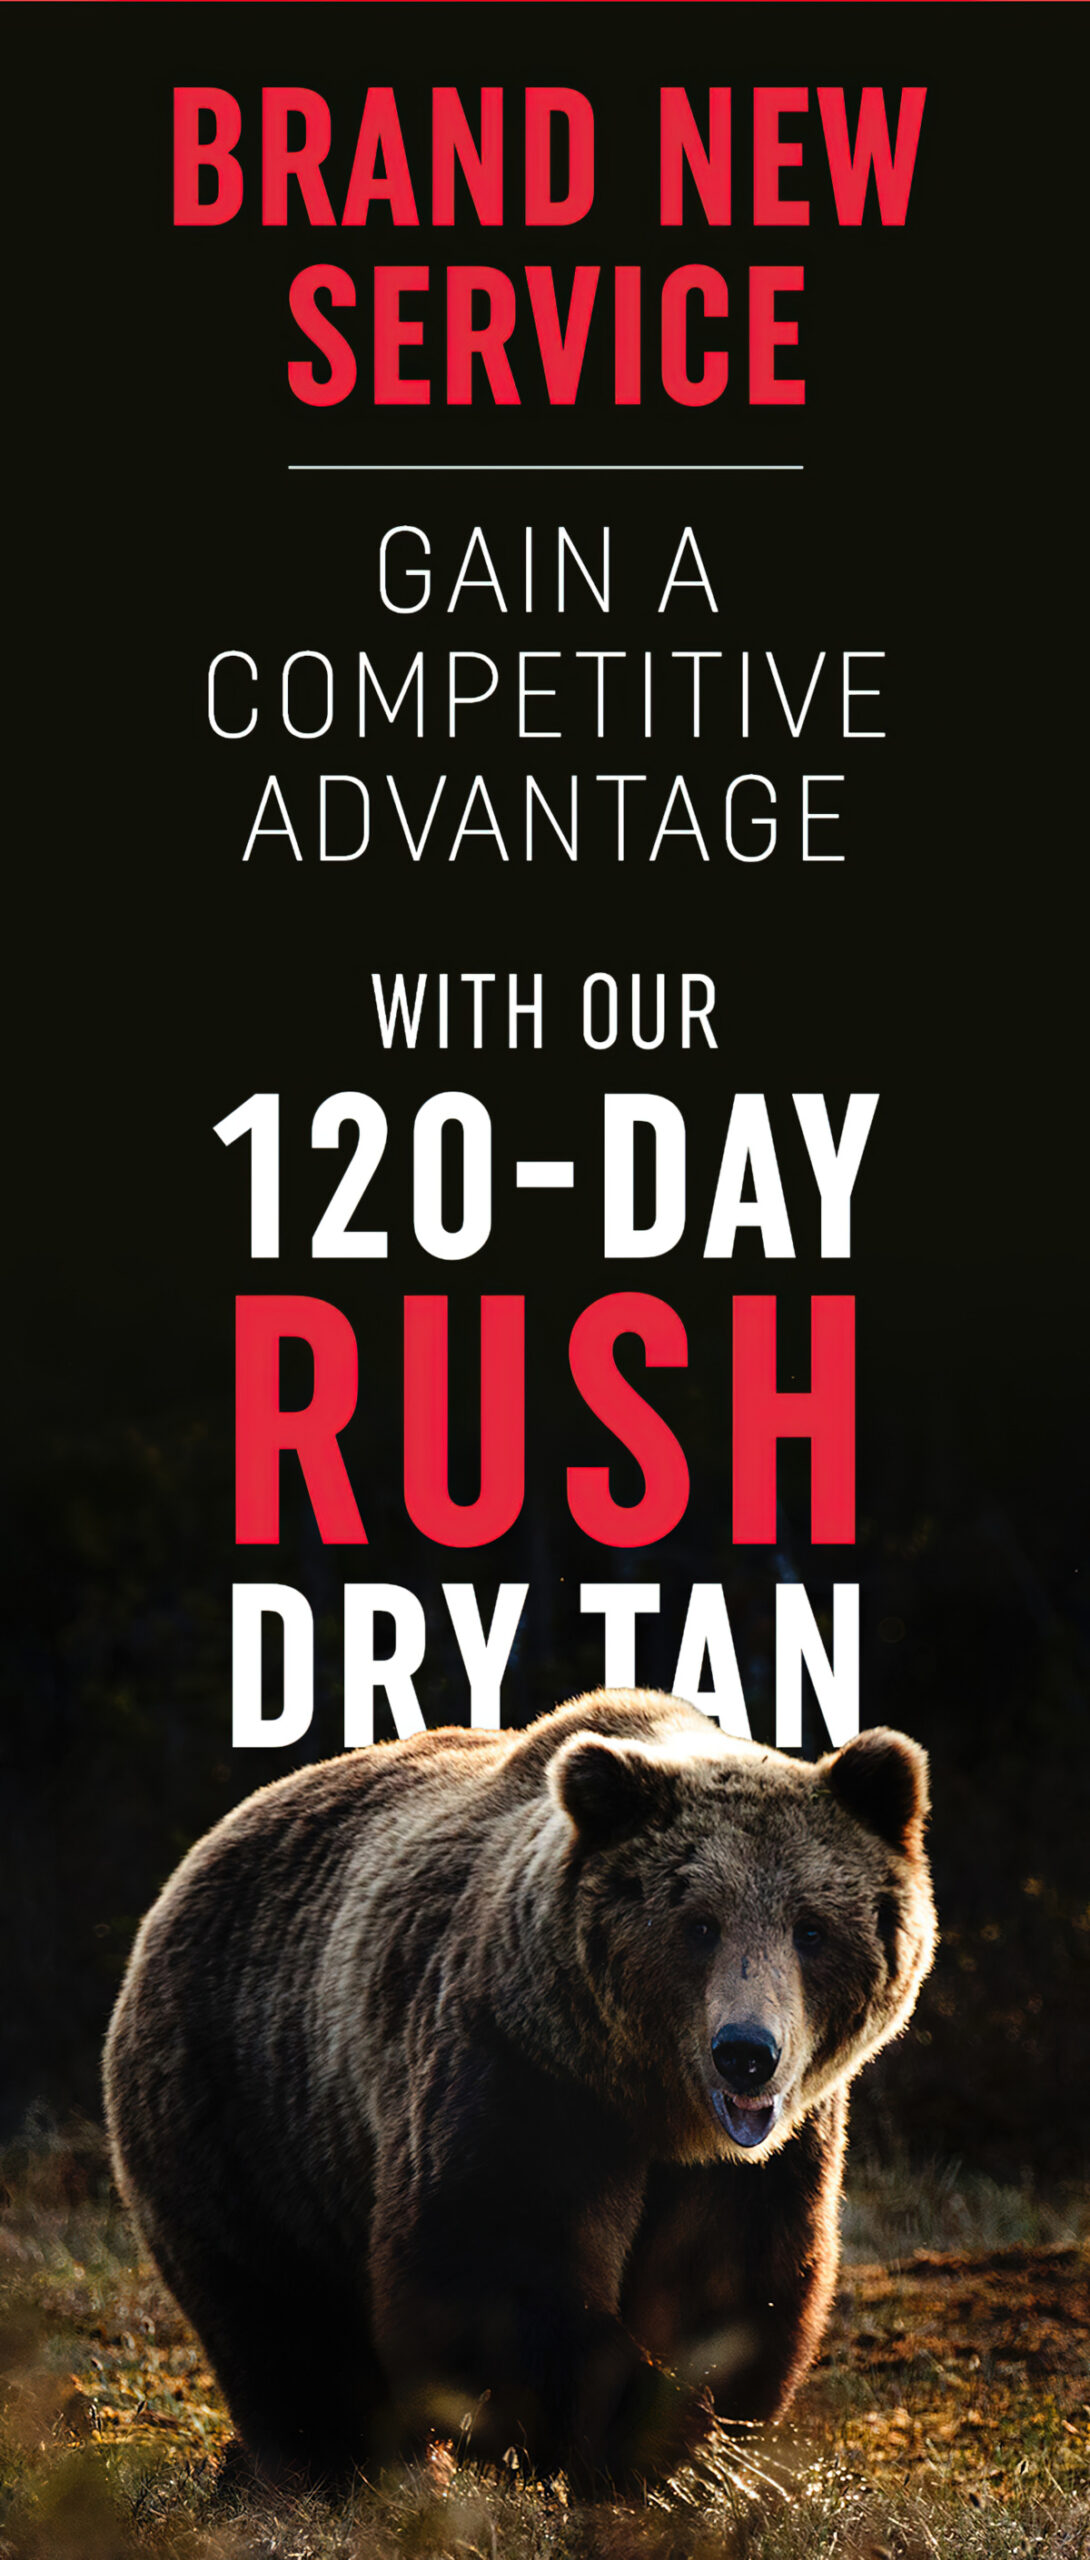 120-Day RUSH Dry Tan Service - Quality Fur Dressing - The Leader in Fur Dressing